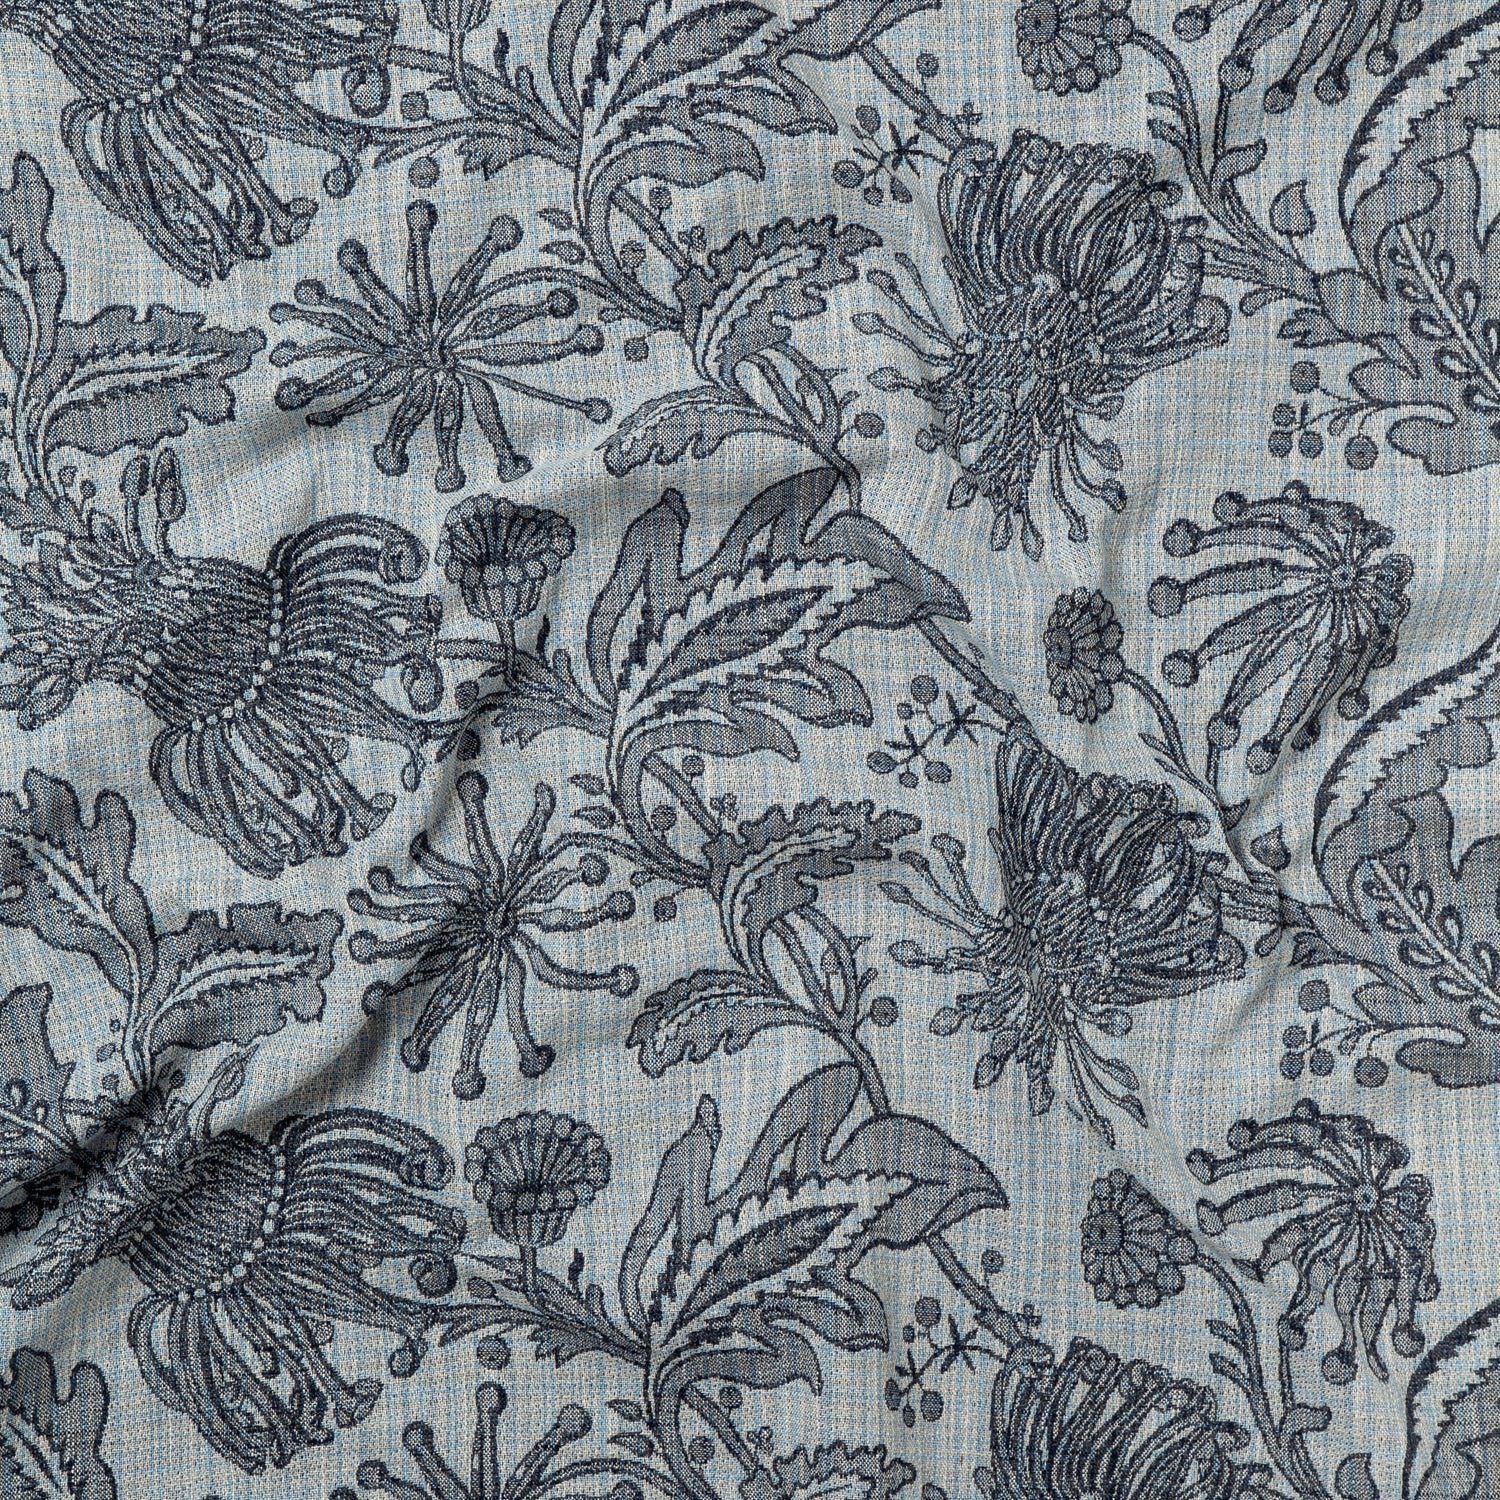 Draped fabric yardage in a large-scale floral print in gray on a light gray field.